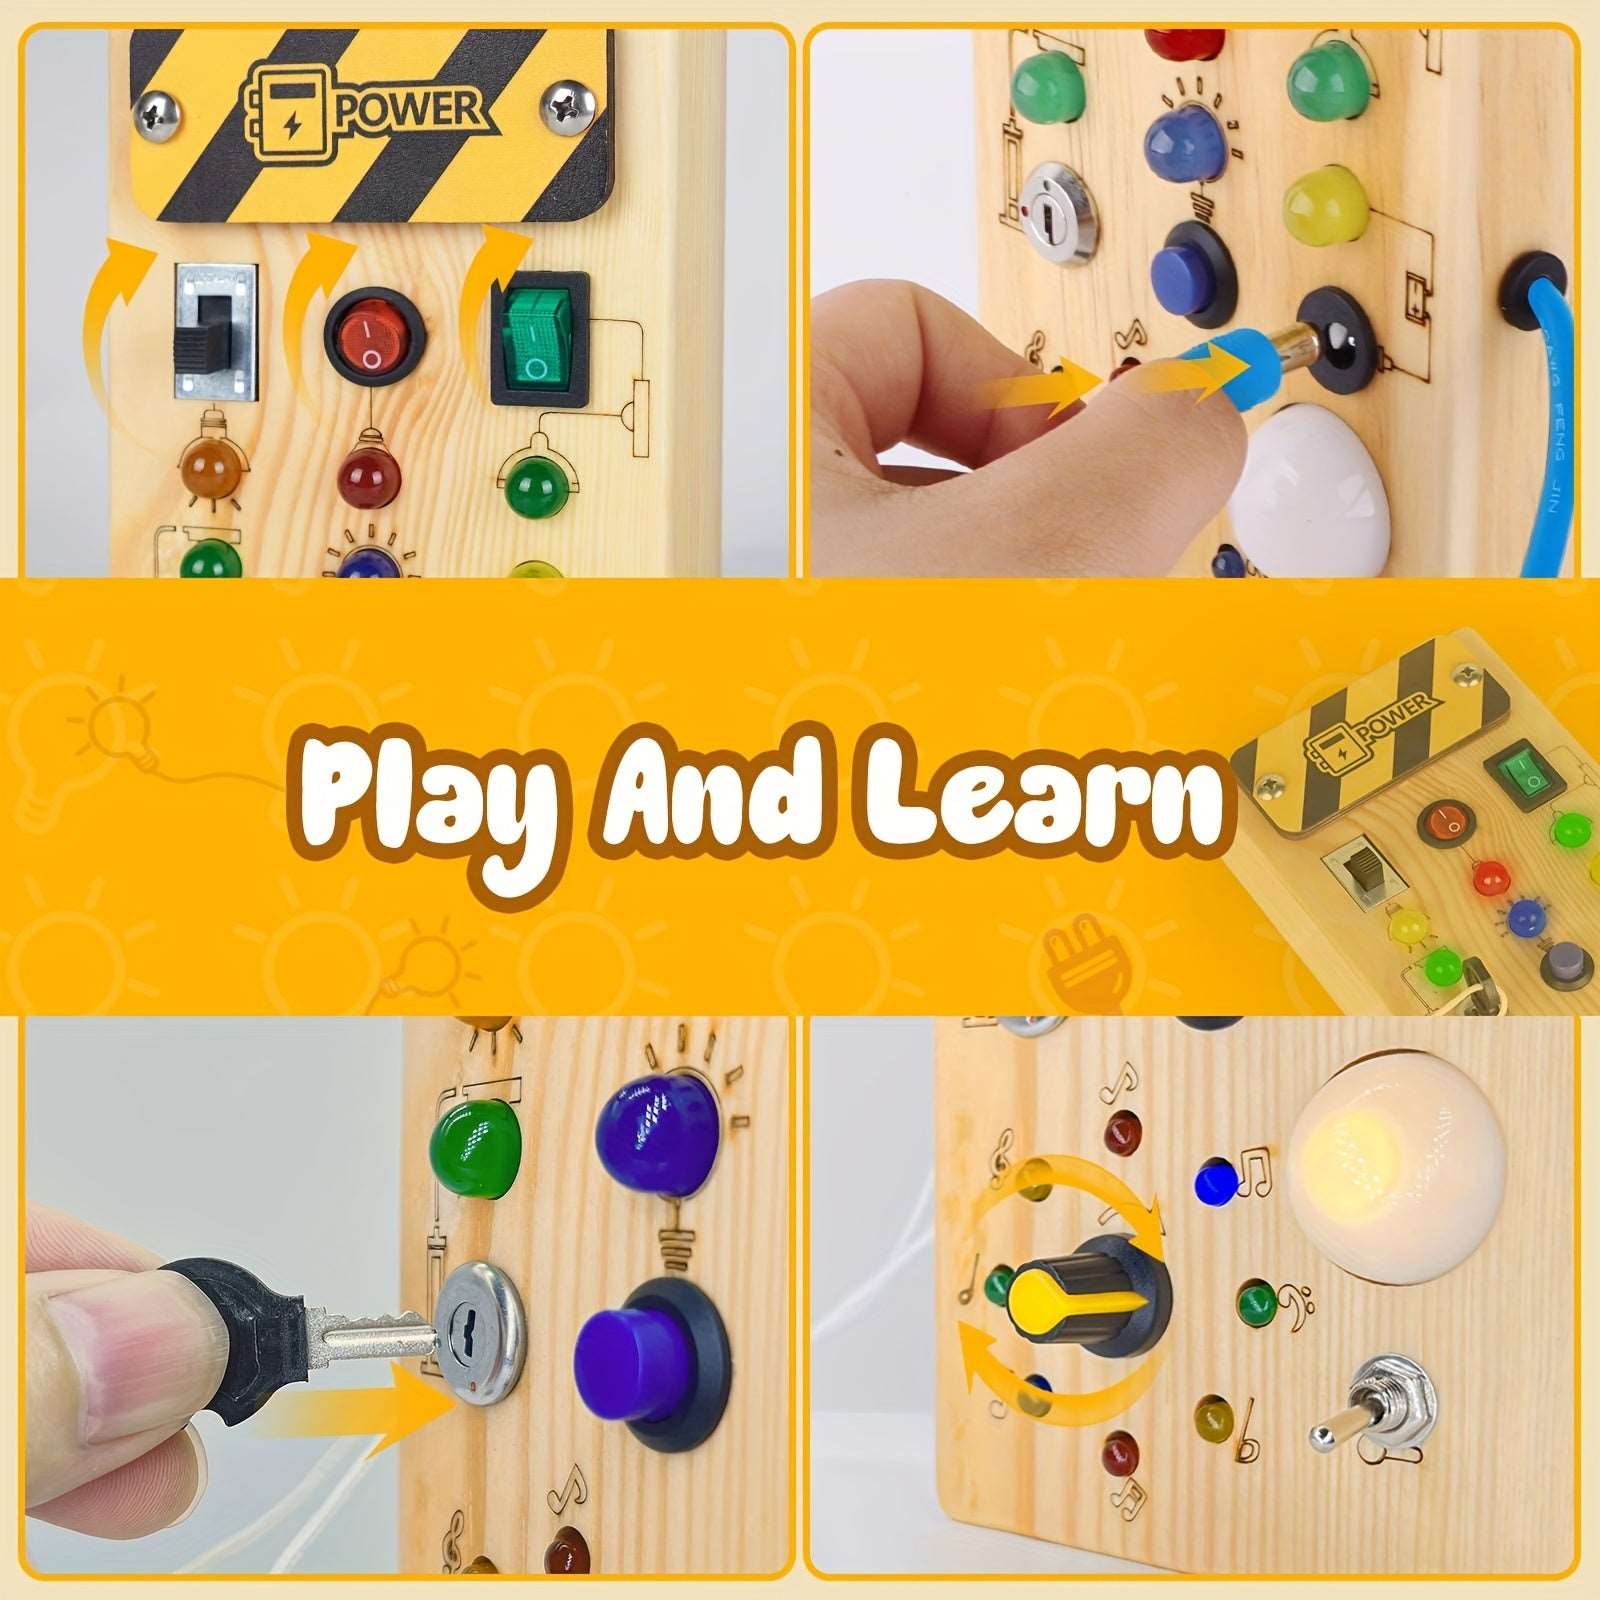 8 LED Light Switches Sensory Toy - Montessori Busy Board For Toddlers Over 1 Year Old - Cykapu